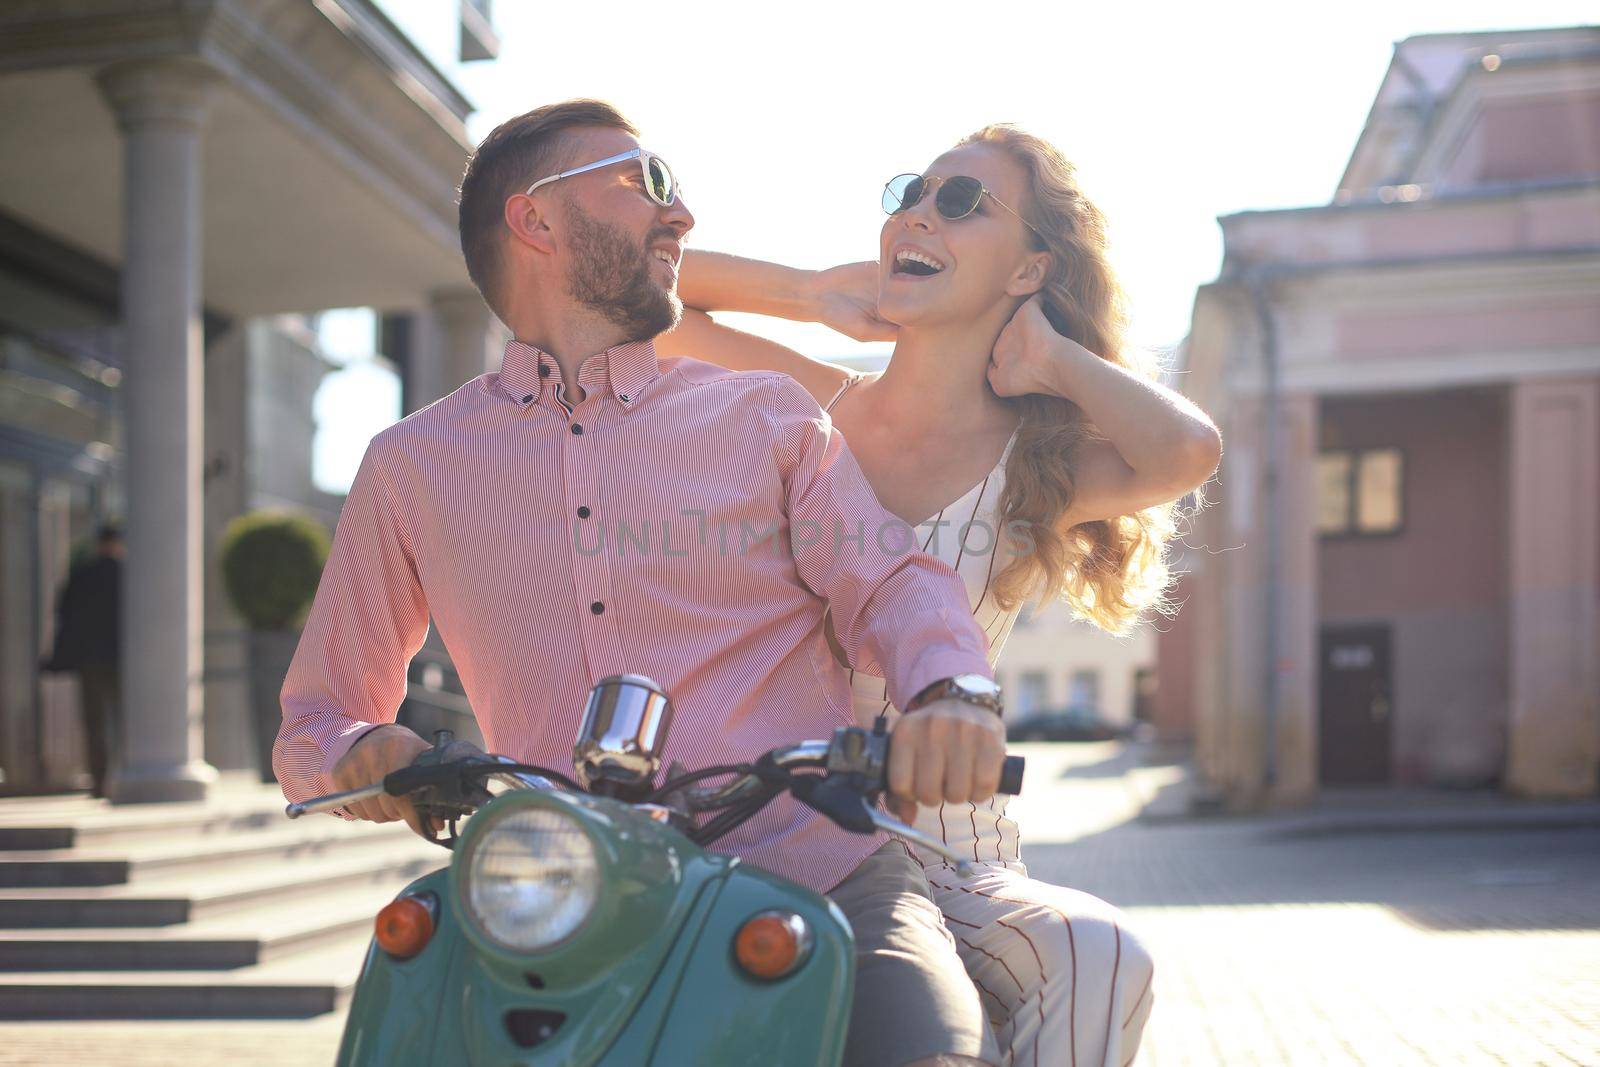 Young couple in love riding a motorbike. Riders enjoying themselves on trip. Adventure and vacations concept. by tsyhun